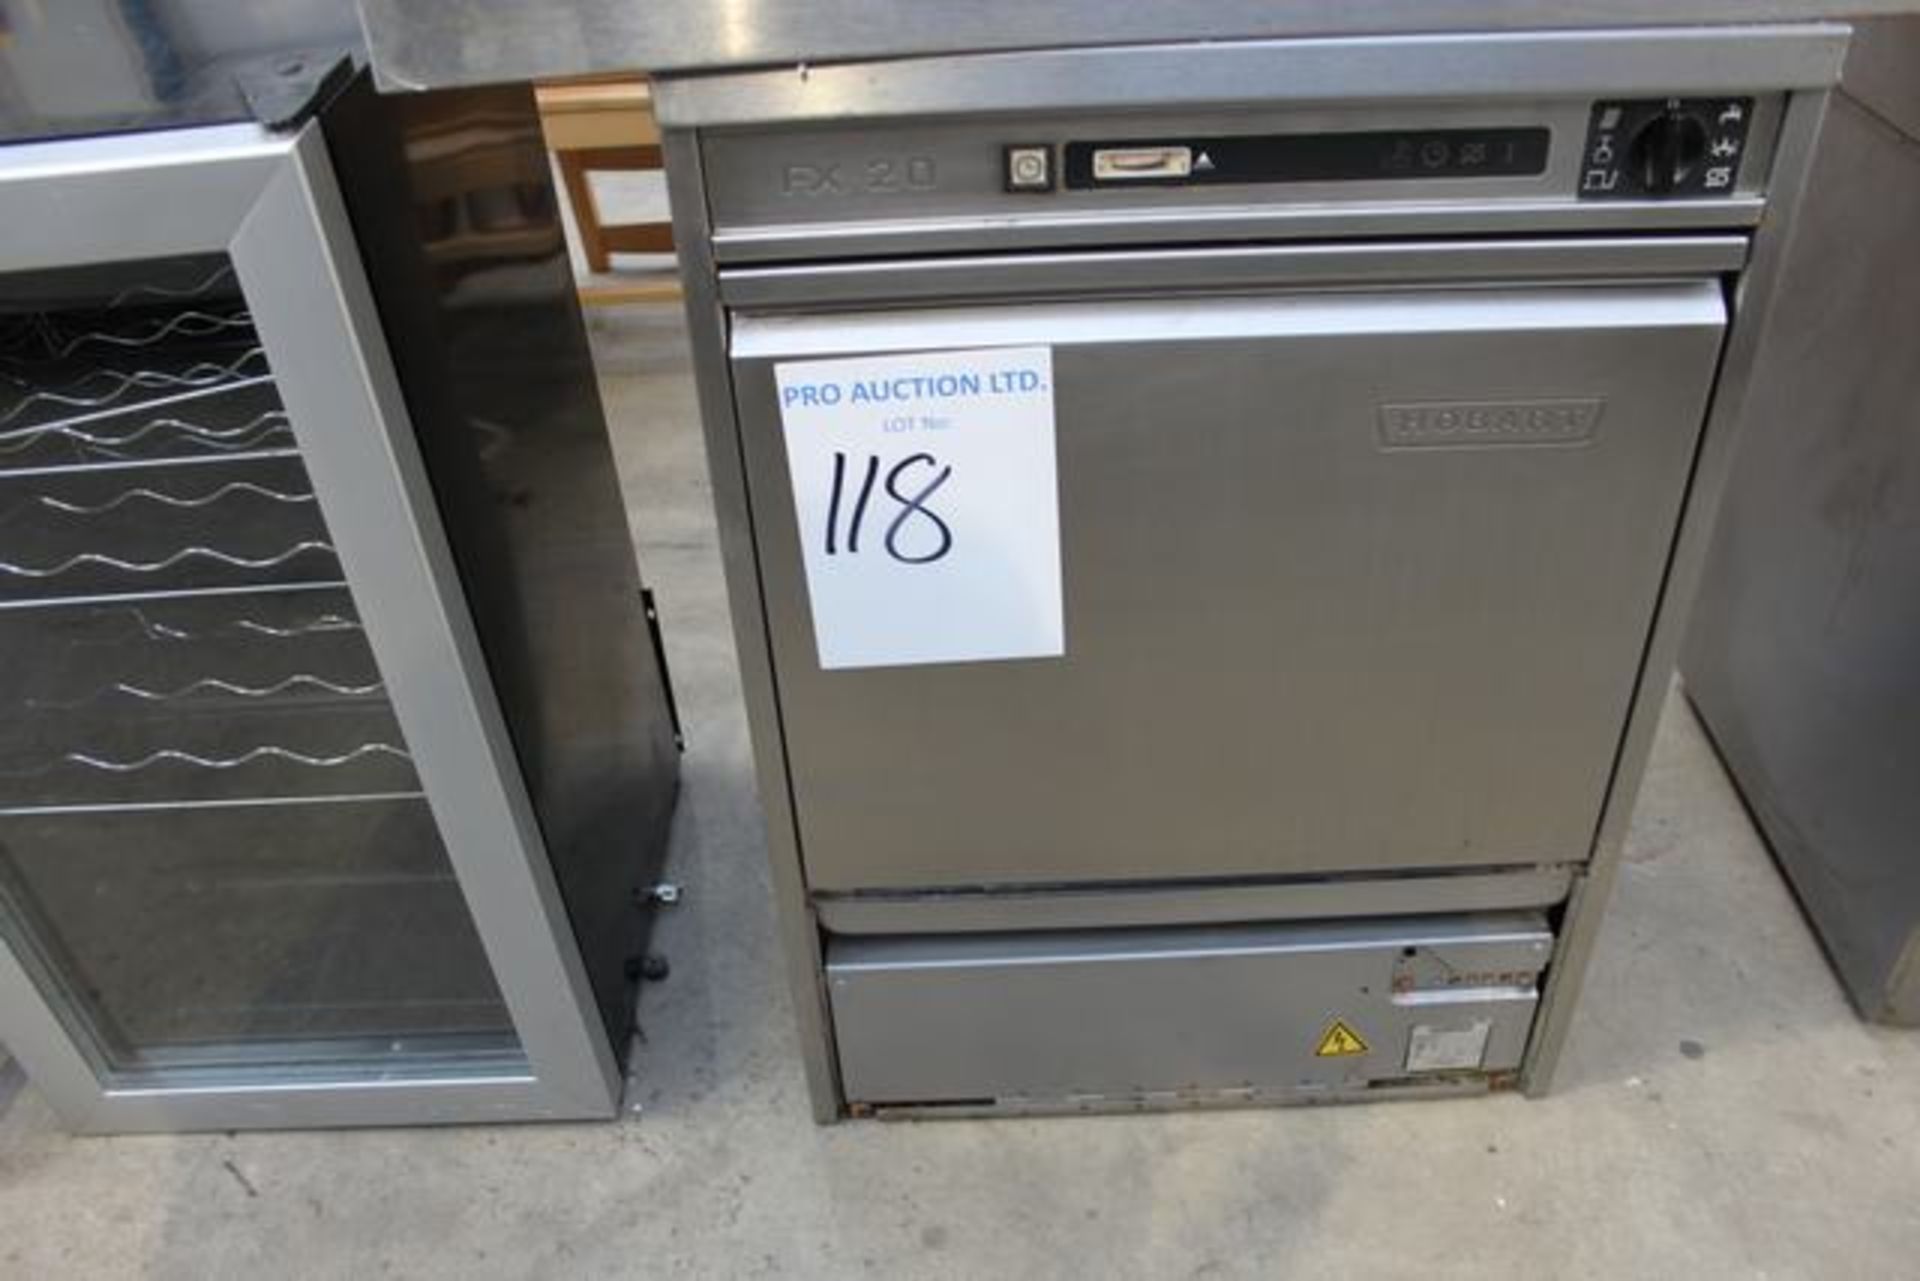 Hobart FX 20 commercial under counter dishwasher 3 phase up to 1260 plates / h, 70 baskets, 2520